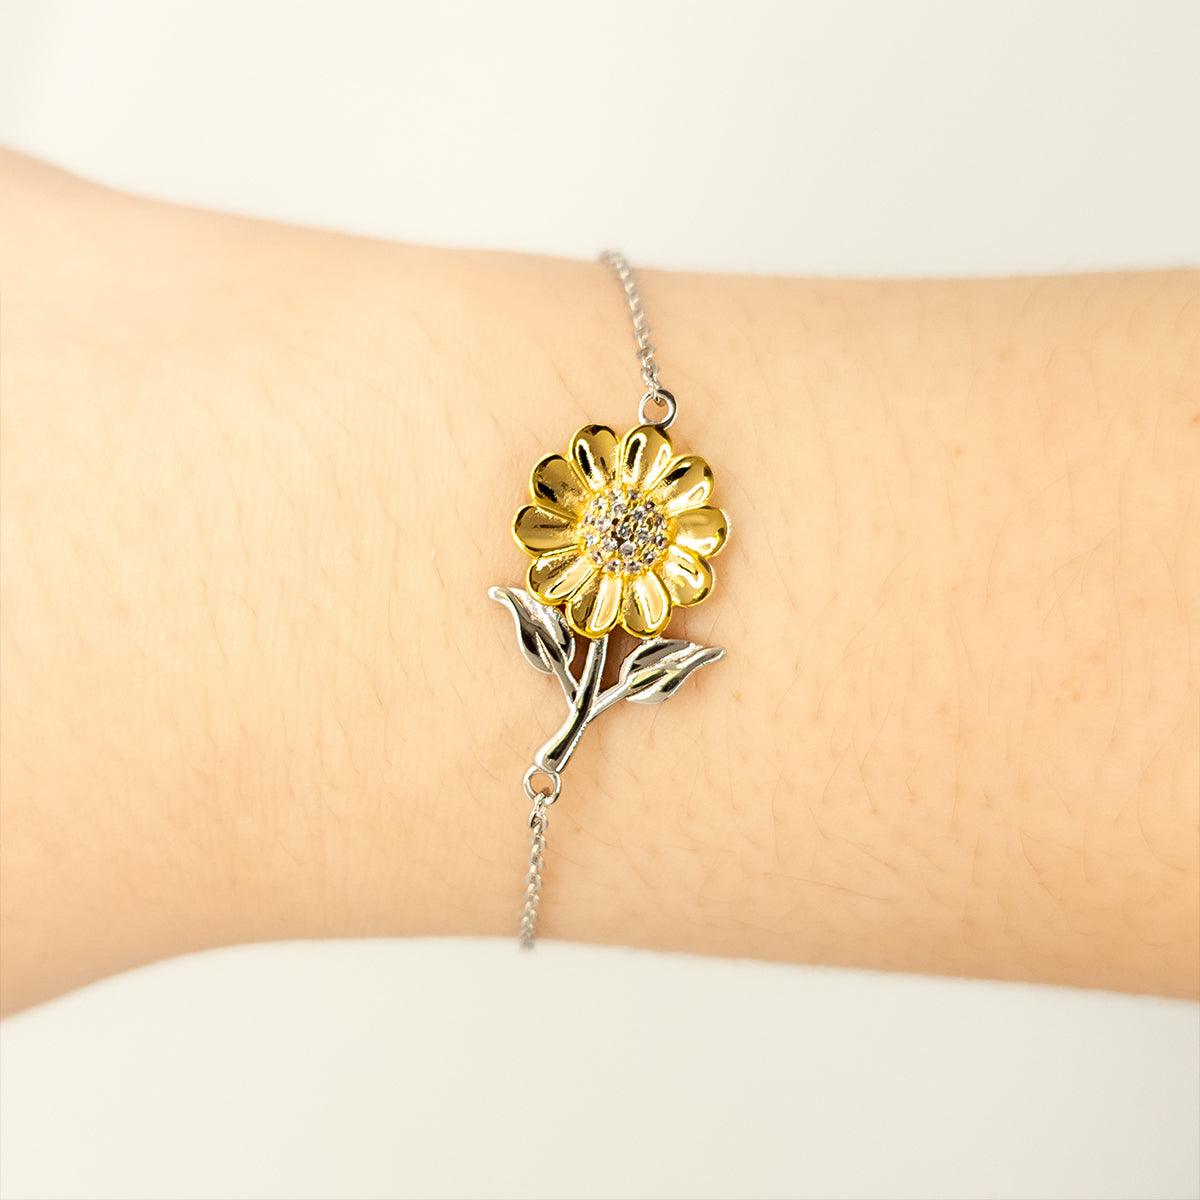 Millwright Sunflower Bracelet - Thanks for being who you are - Birthday Christmas Jewelry Gifts Coworkers Colleague Boss - Mallard Moon Gift Shop